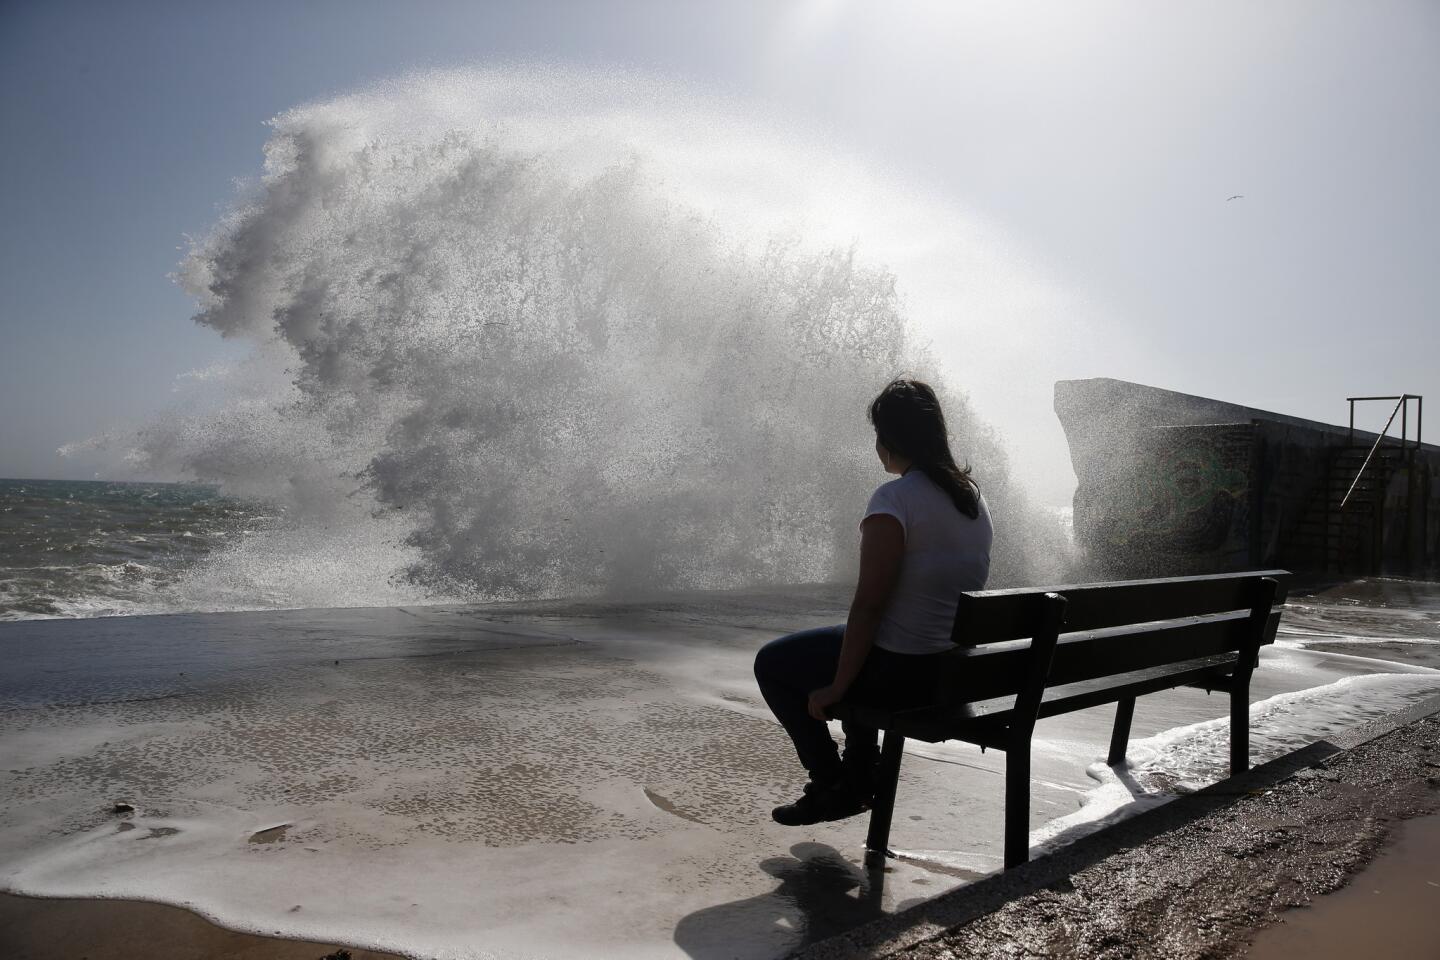 In the southern Athens coastal suburb of Flisvos, a woman braves wave splashes on a warm, windy afternoon.